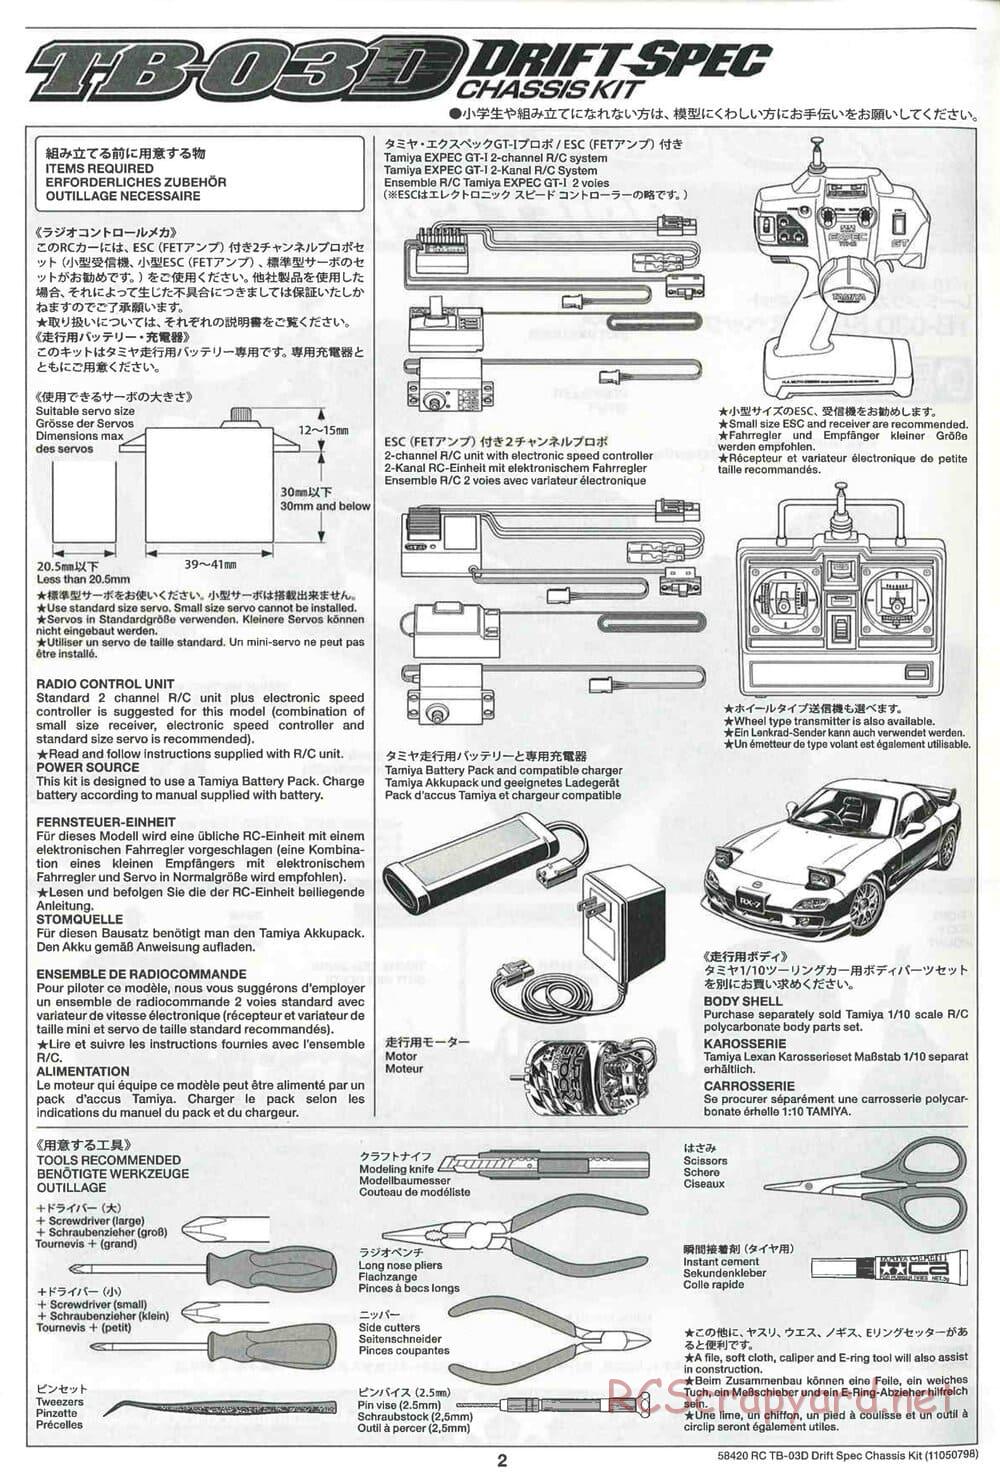 Tamiya - TB-03D HP Drift Spec Chassis - Manual - Page 2